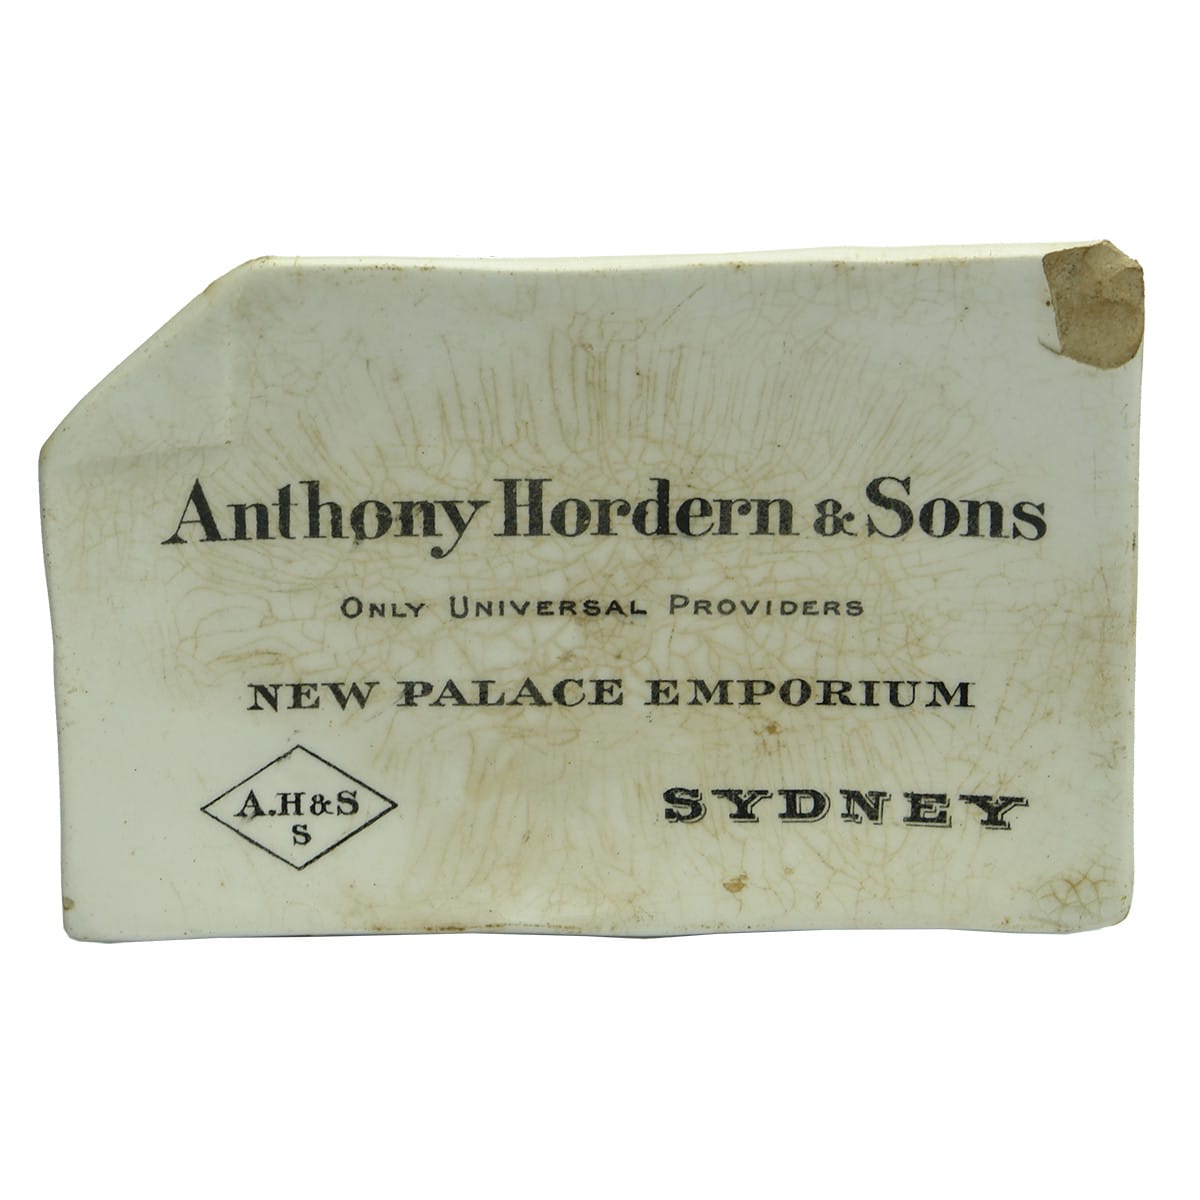 Ceramic Change Tray. Anthony Hordern & Sons, New Palace Emporium, Sydney. (New South Wales)